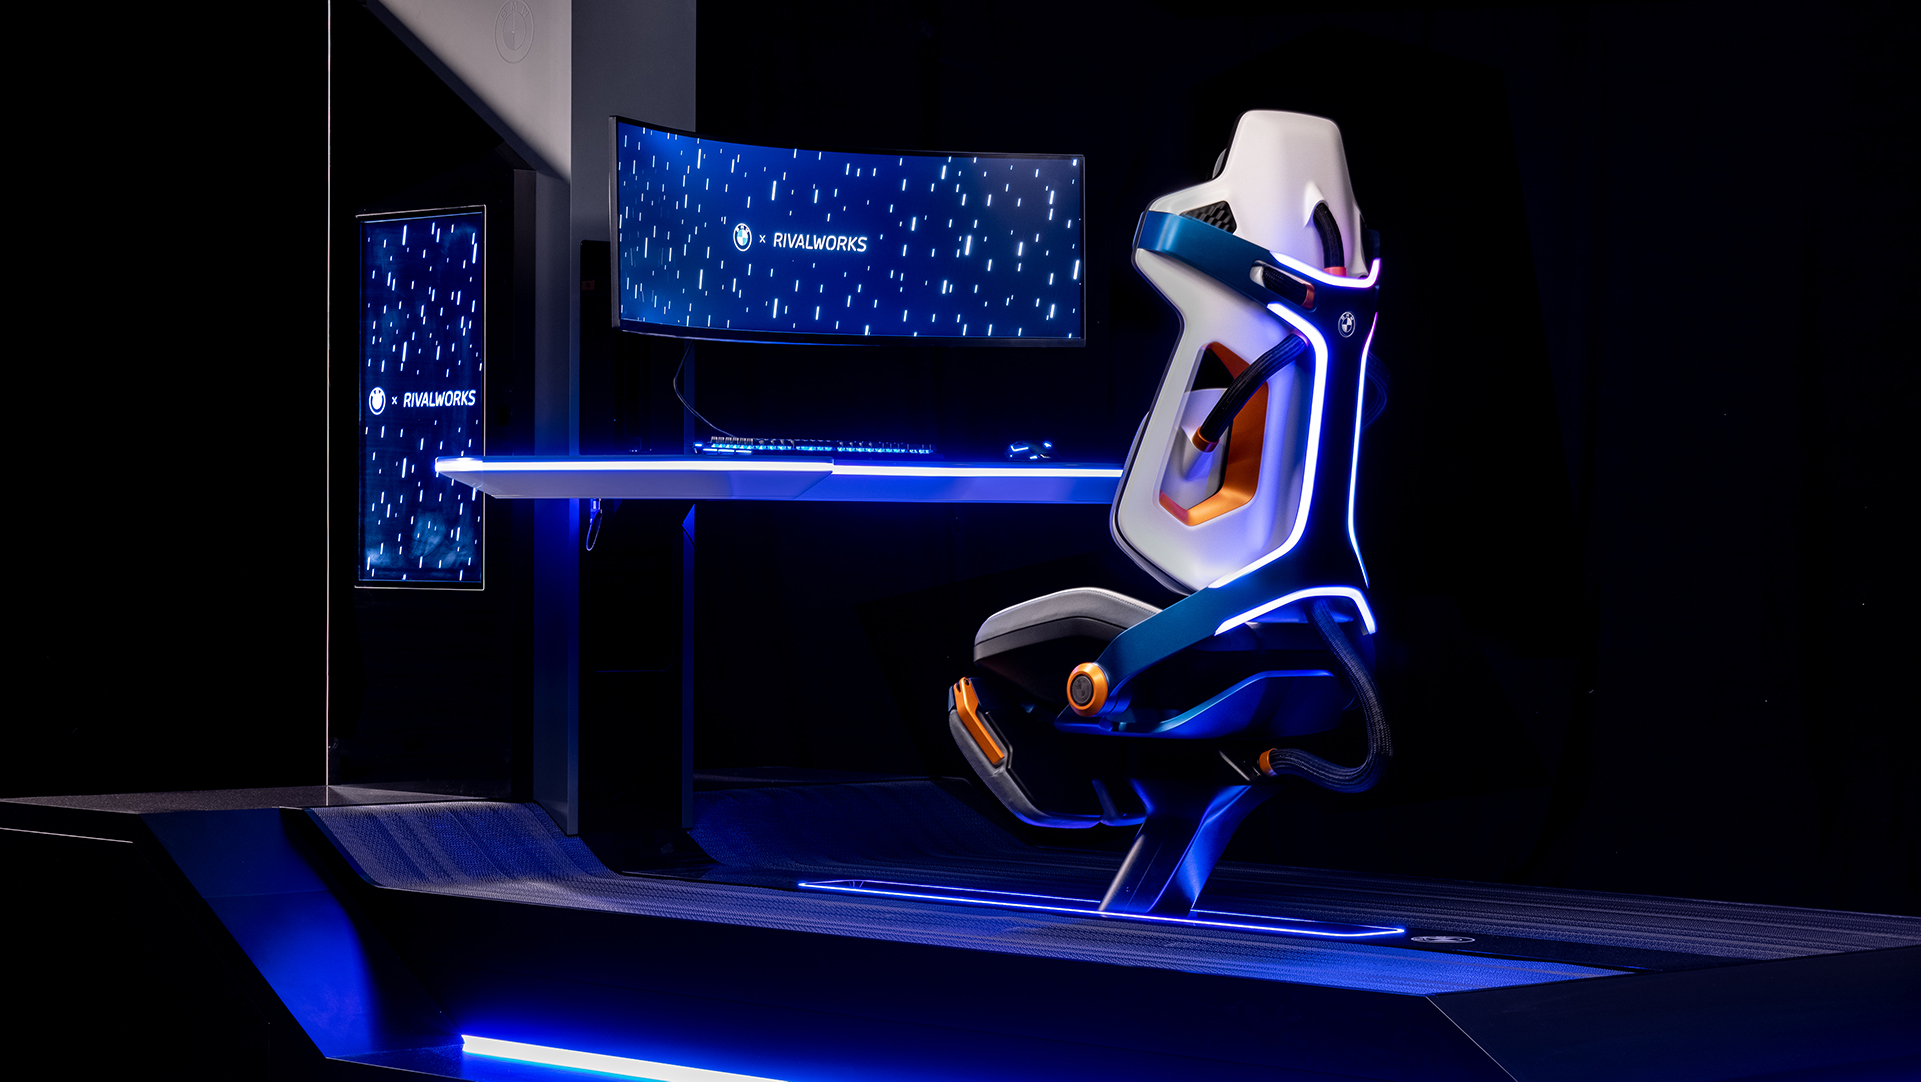 BMW Rivalworks The Rival Rig gaming chair concept from various angles on black background